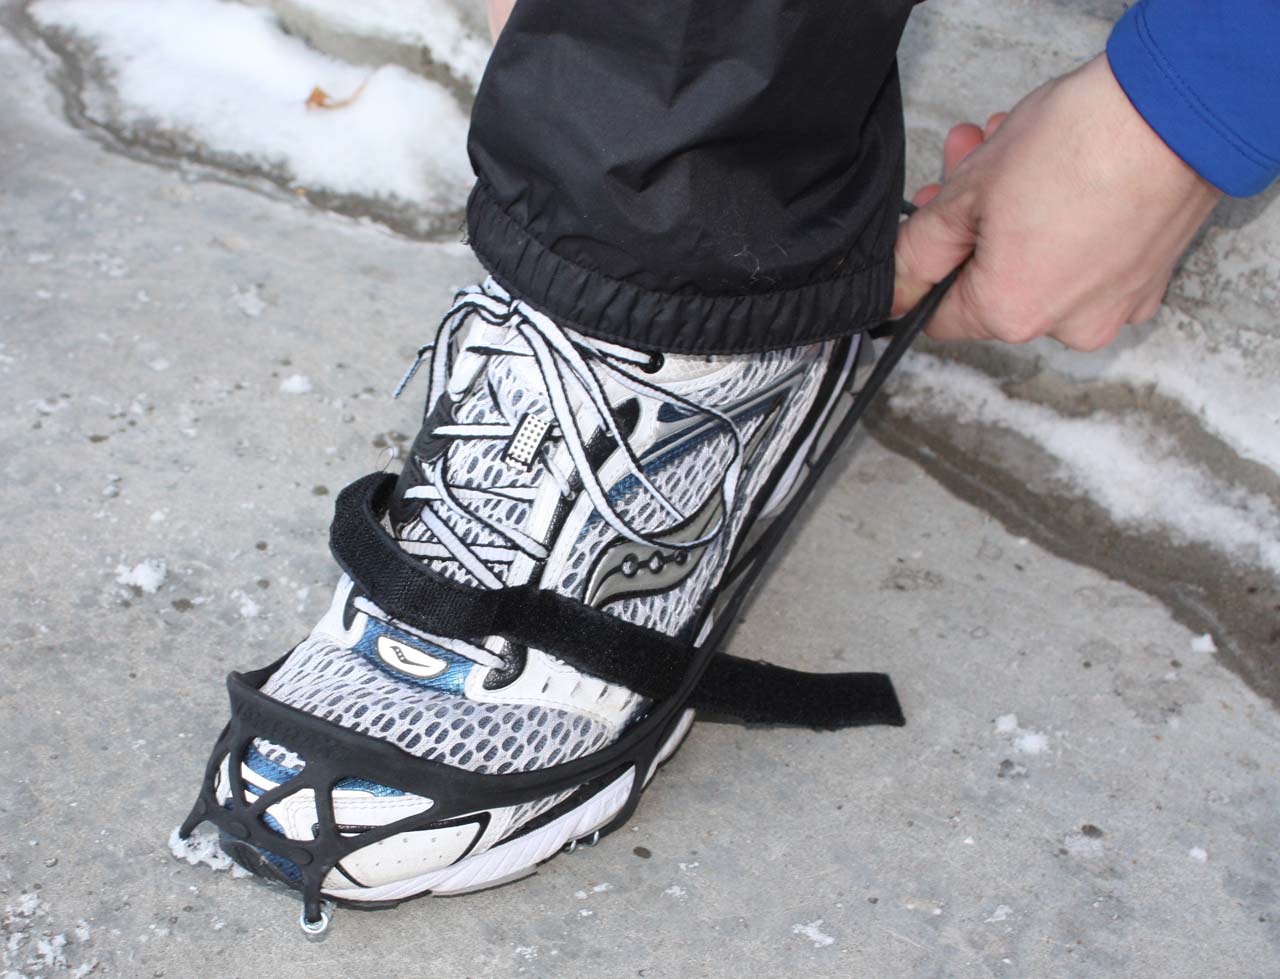 Once the forefoot is secure, stretch the back of the Yaktrax over the heel of your shoe. © Brian Hancock